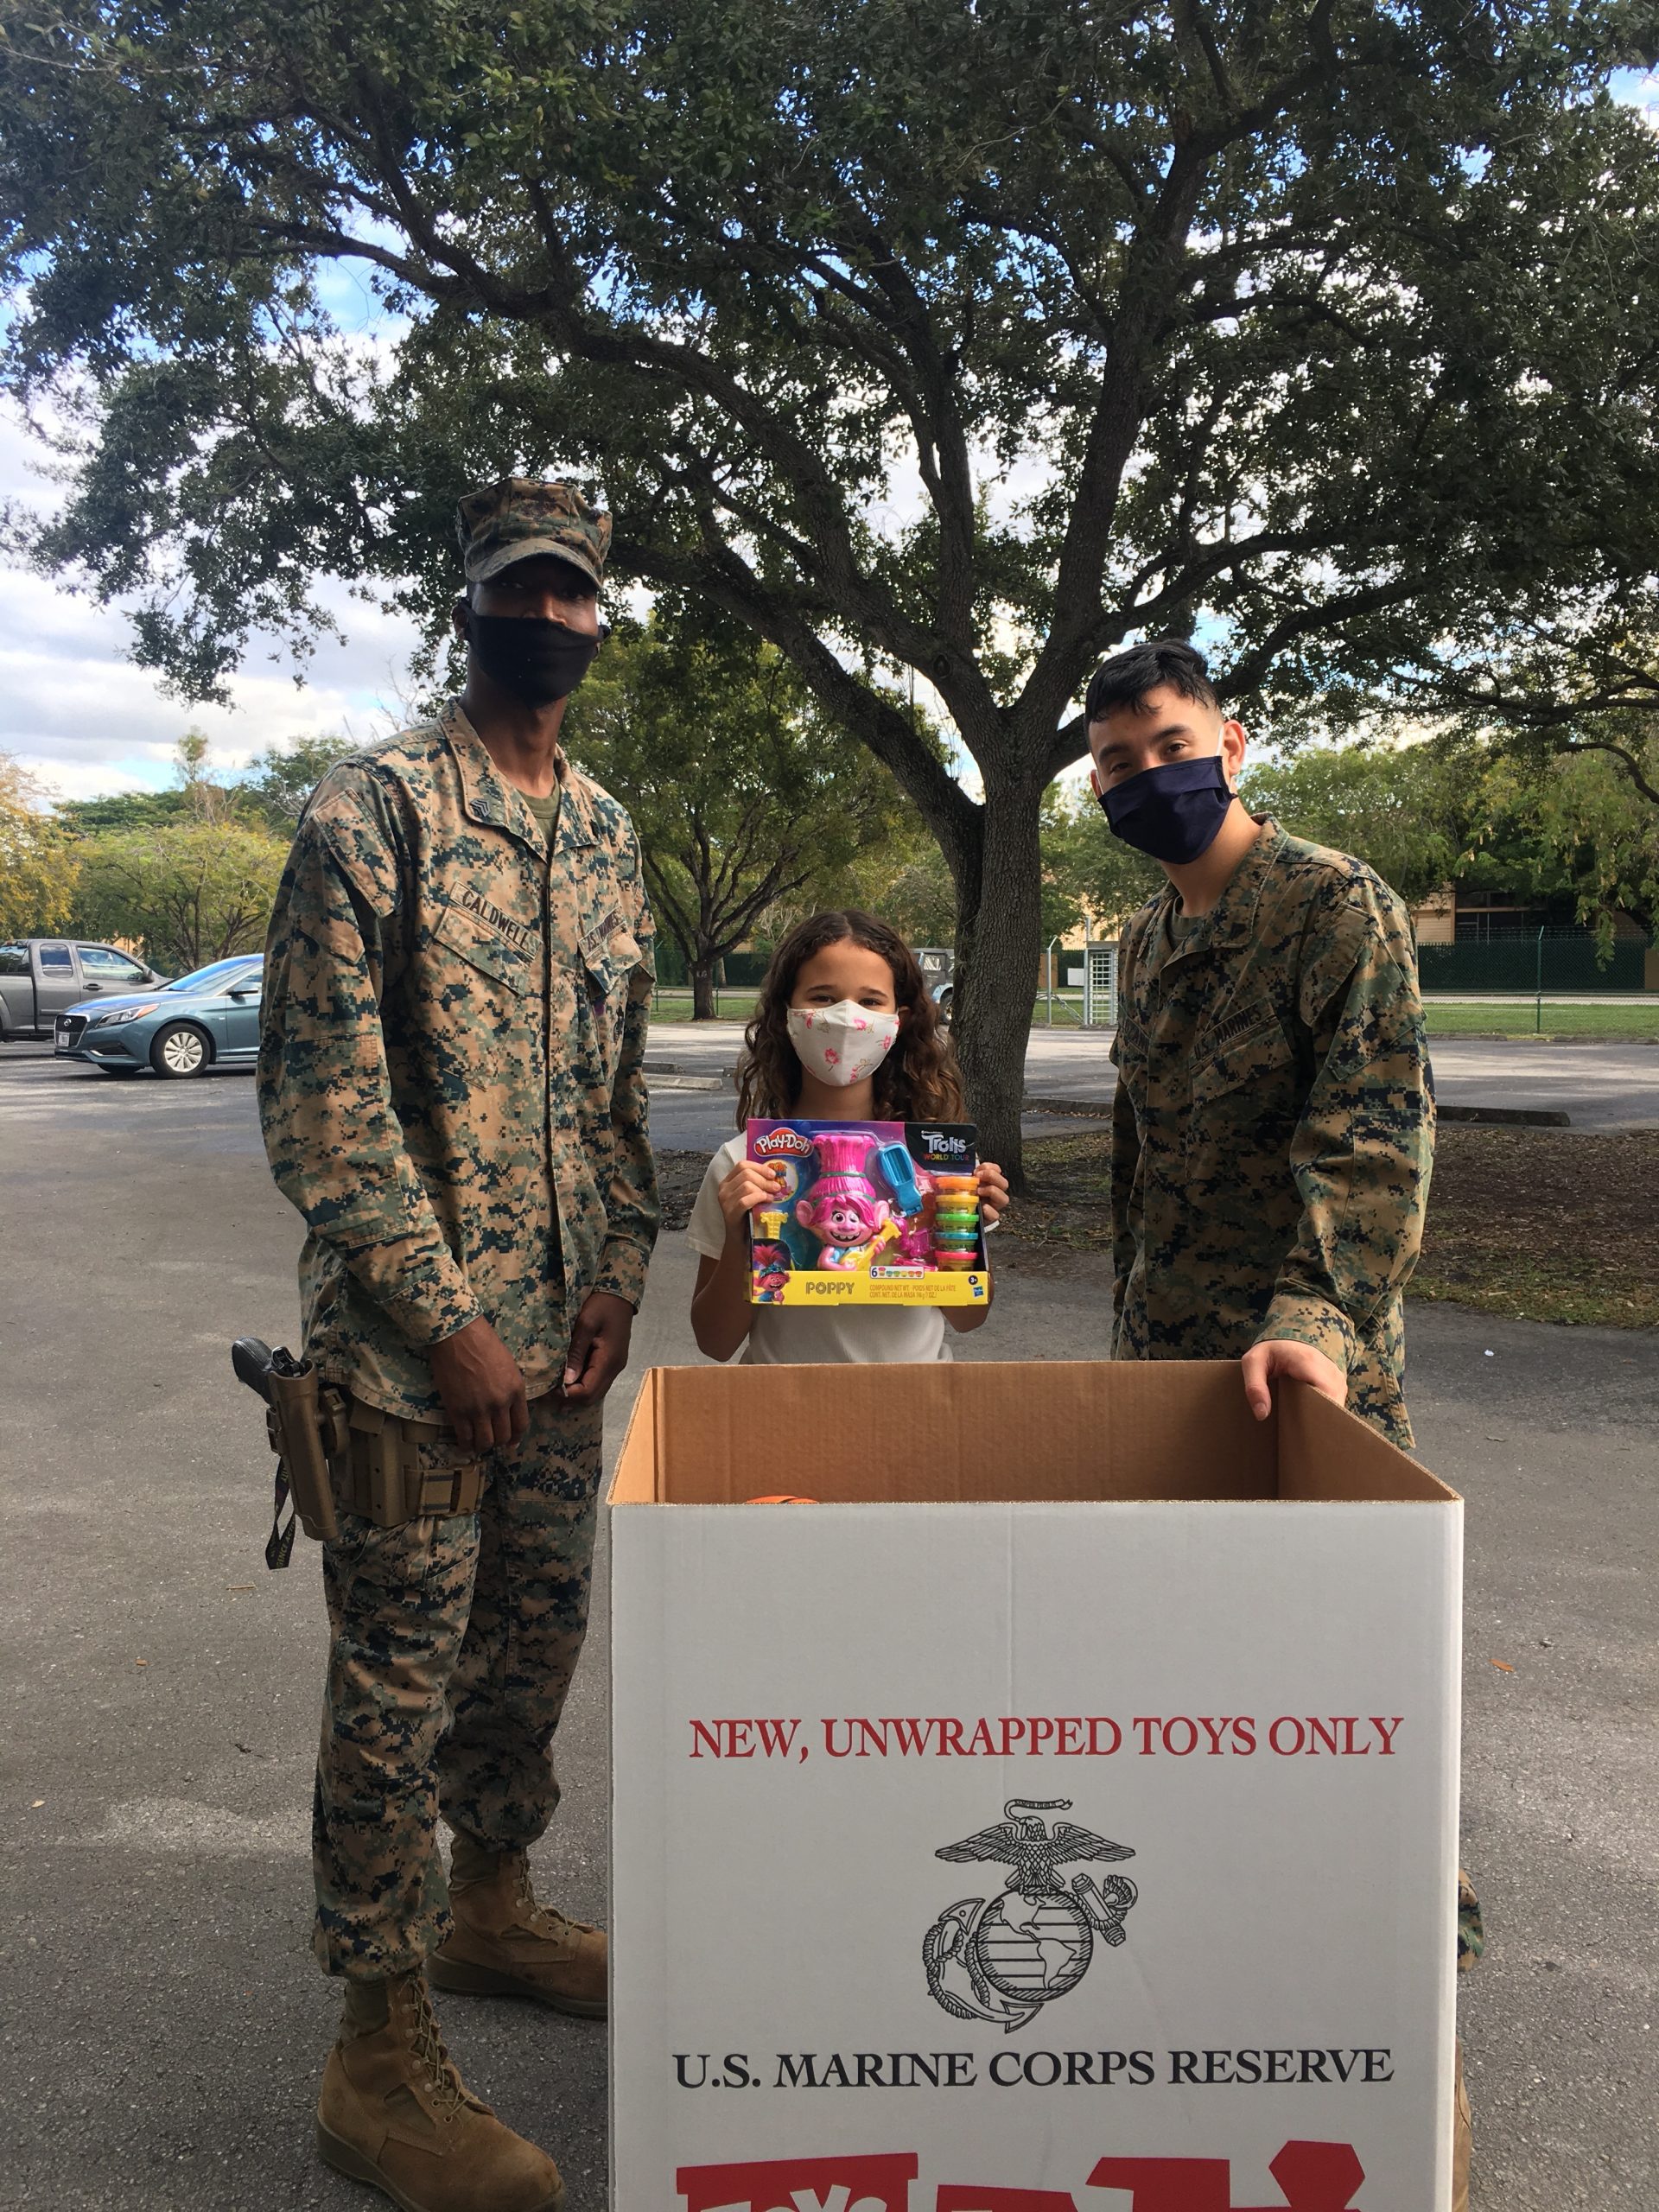 Image: Adita's daughter collecting toys for Toys for Tots with 2 US Marines (Toys for Tots: Making a Difference for America's Children Adita Lang Contributor Miami Mom Collective)